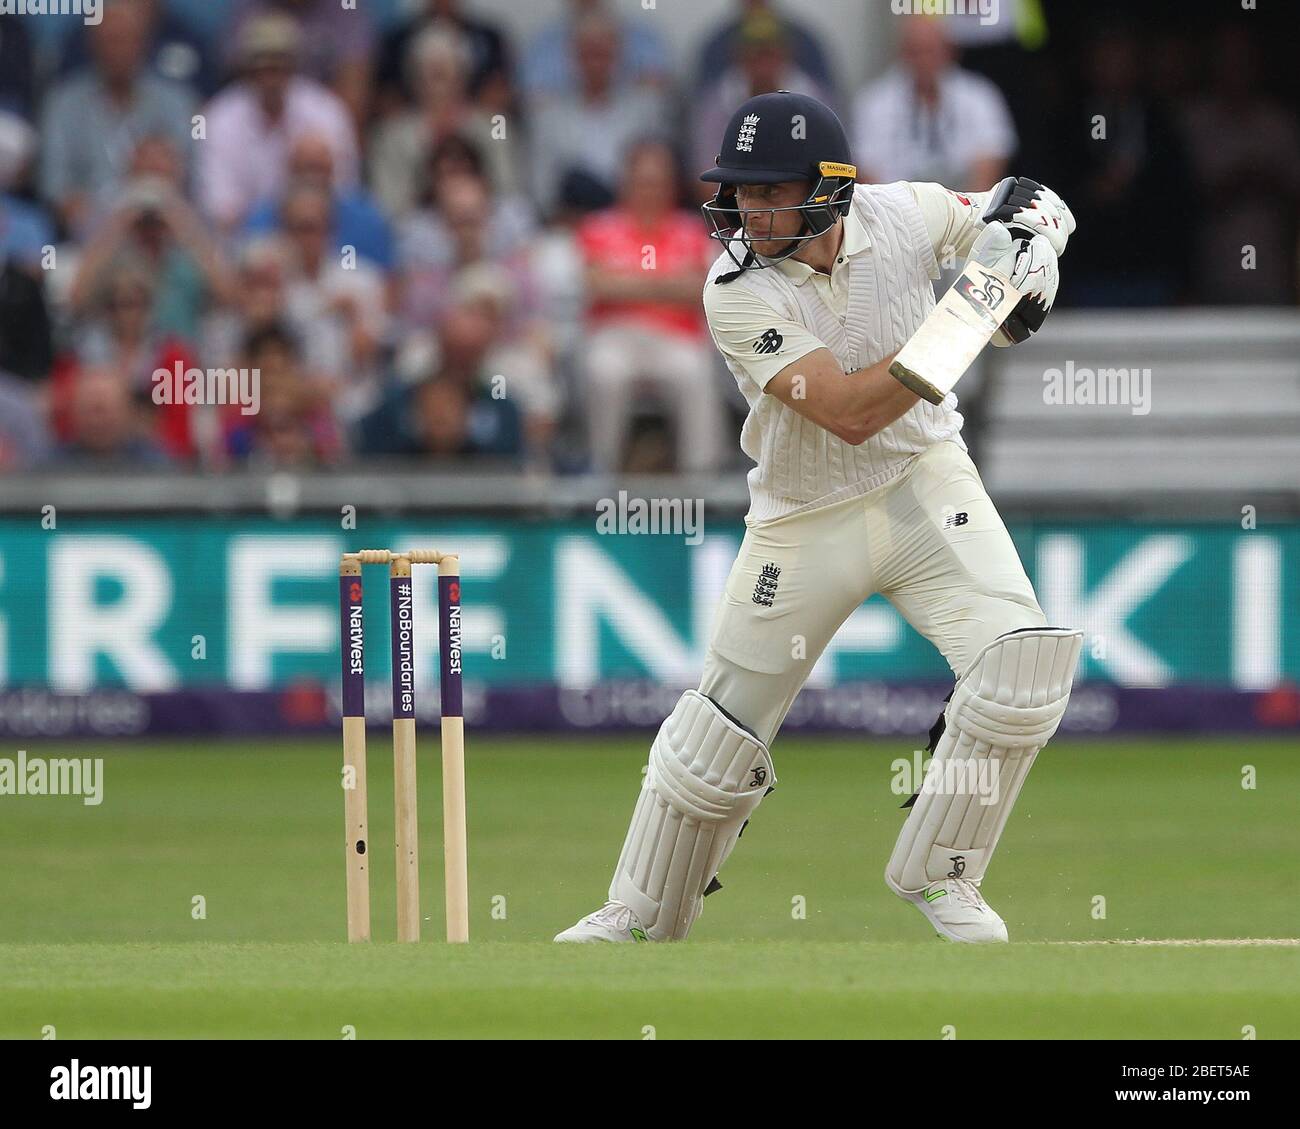 LEEDS, UK - JUNE 3rd Jos Buttler of England batting during the third day of the Second Nat West Test match between England and Pakistan at Headingley Cricket Ground, Leeds on Sunday 3rd June 2018. (Credit: Mark Fletcher | MI News) Stock Photo